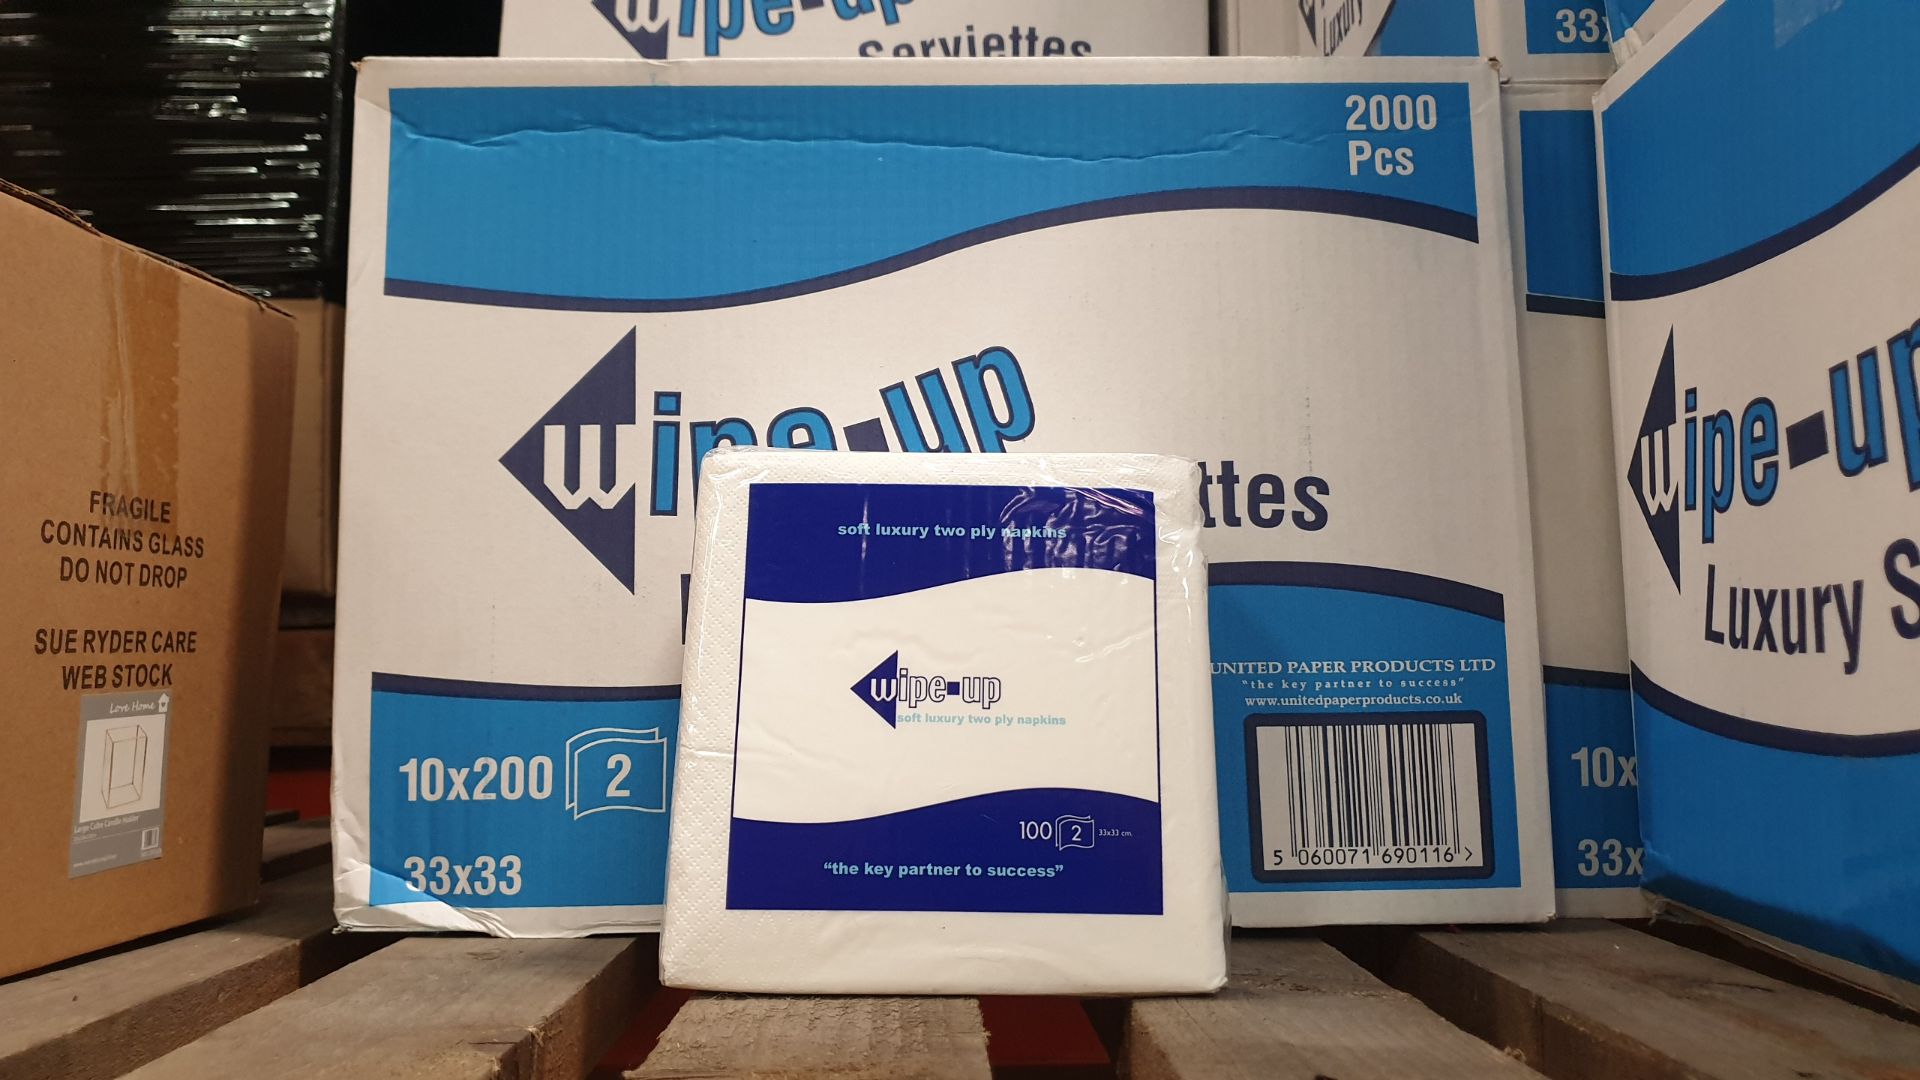 6000 X WIPE UP LUXURY SERVIETTES - 2 PLY - IN 3 CARTONS